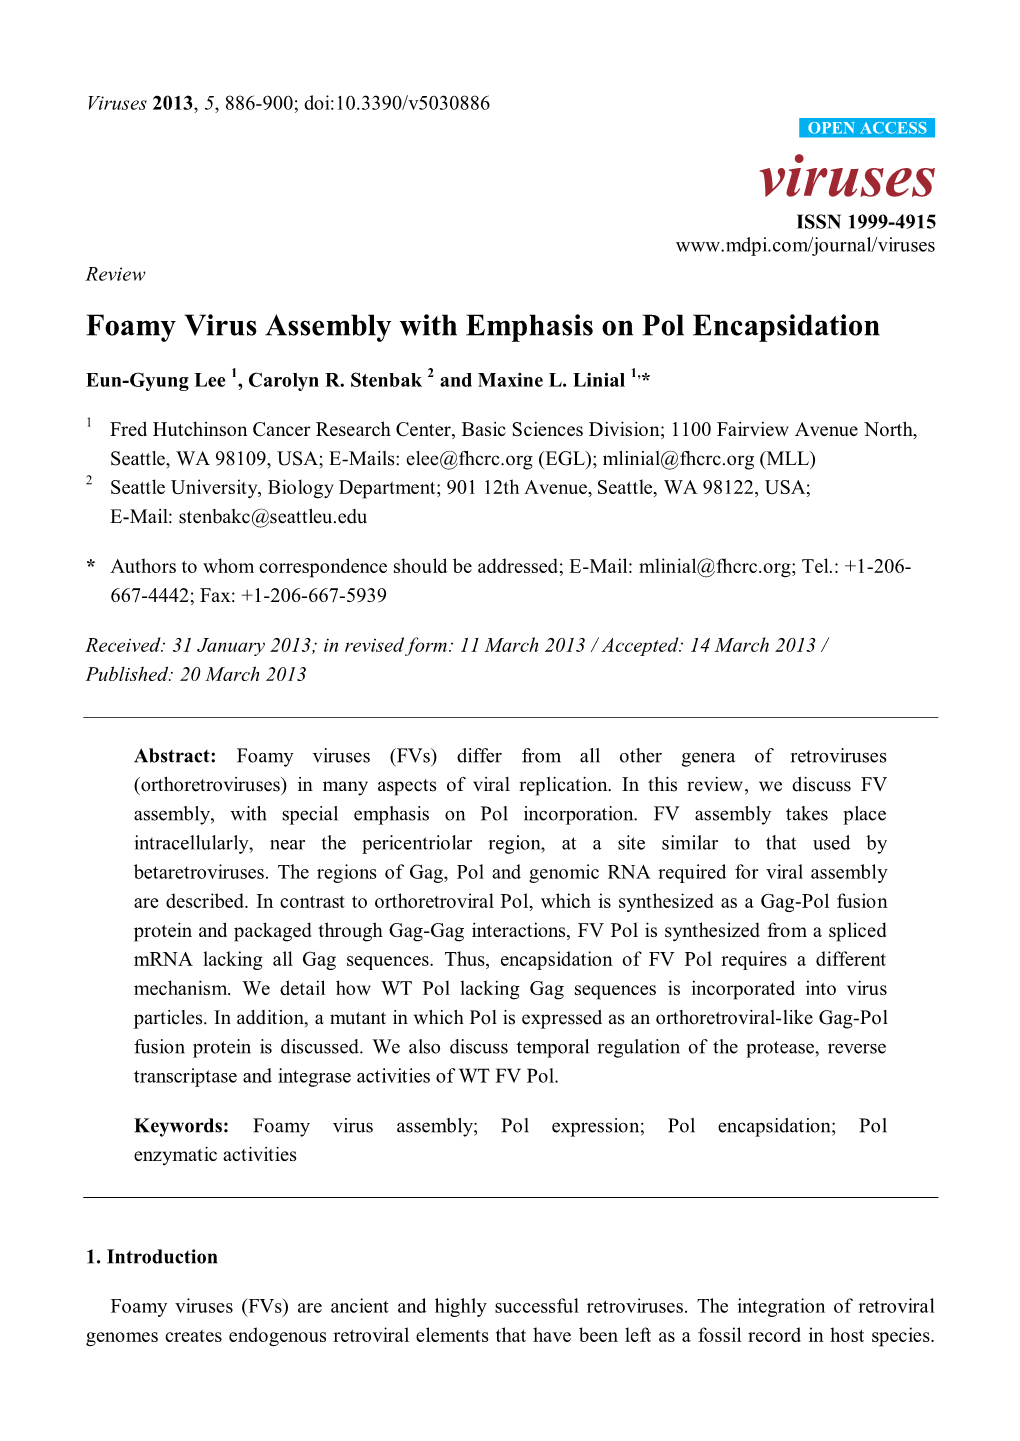 Foamy Virus Assembly with Emphasis on Pol Encapsidation